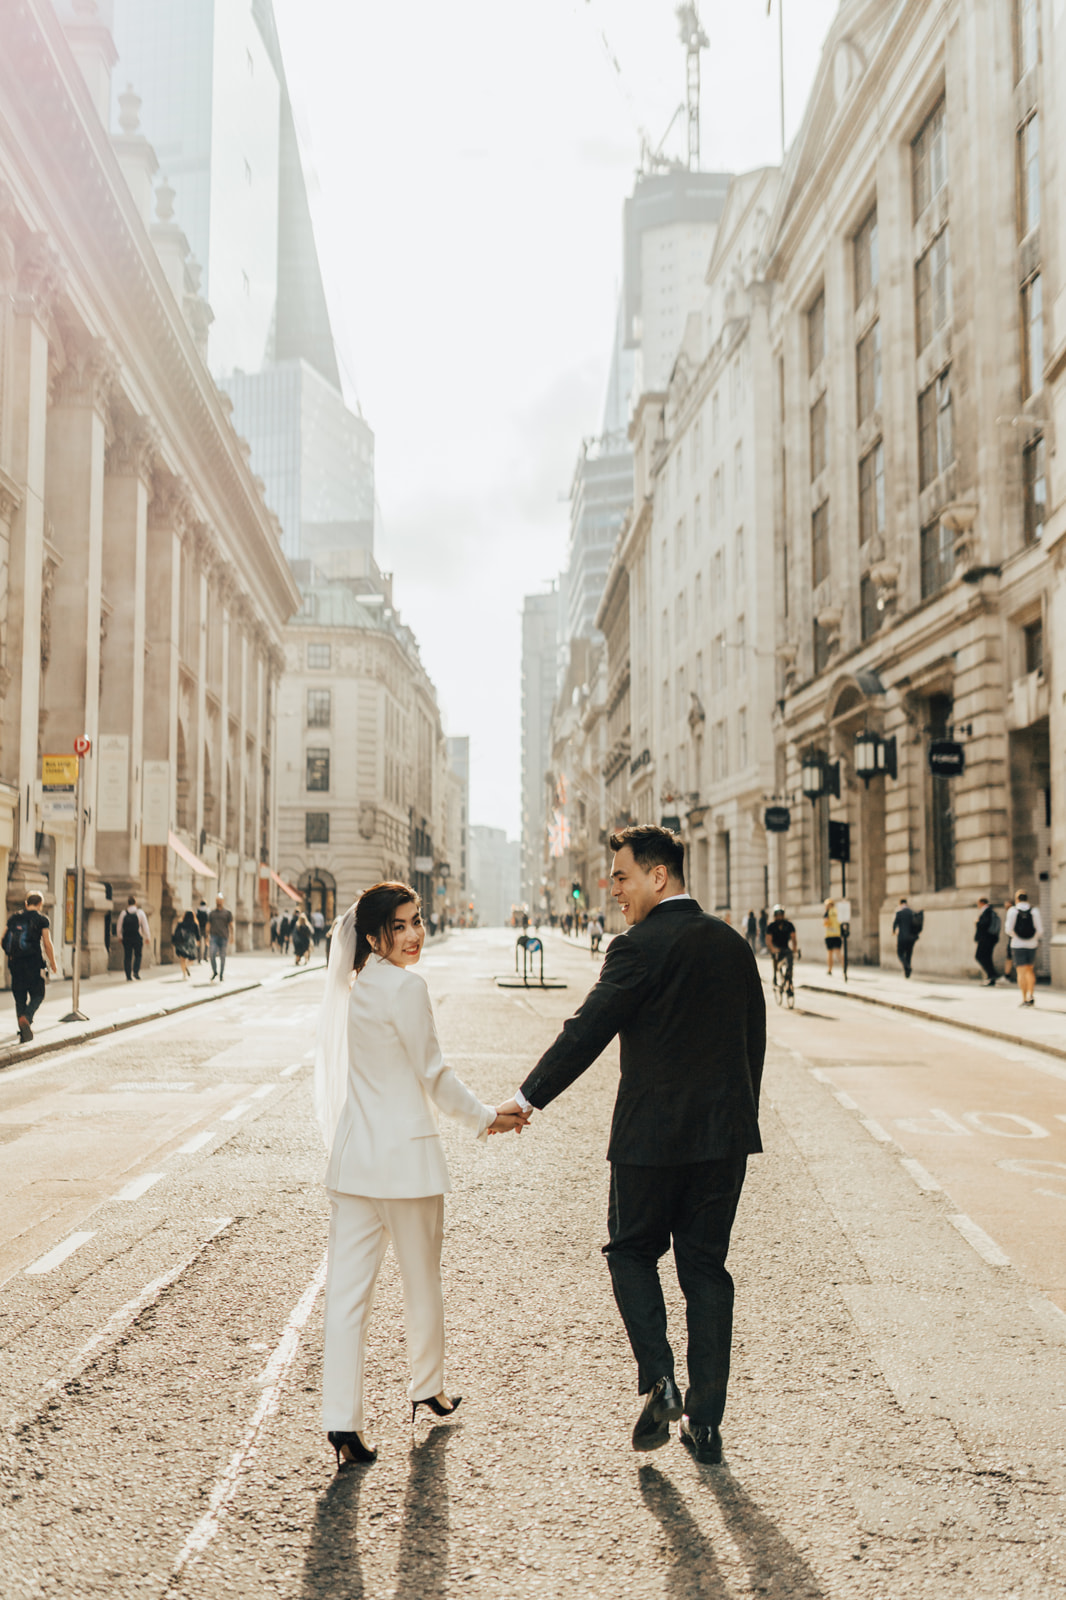 Man and Woman holding hands in the streets of london with no traffic looking over their shoulder